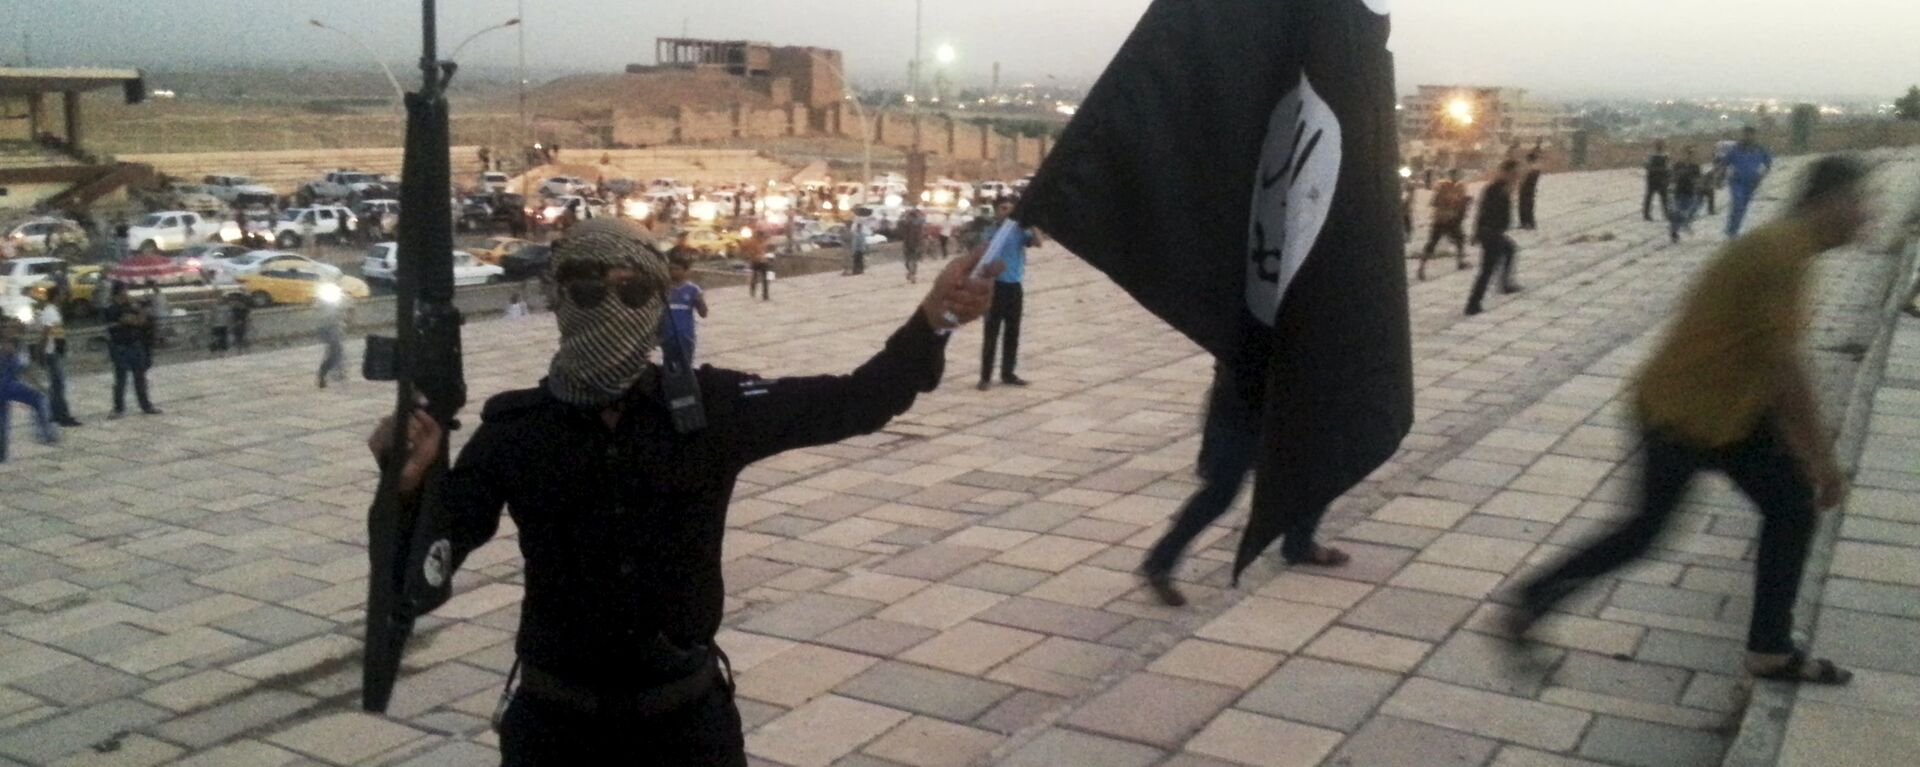 A fighter of Daesh holds an ISIL flag and a weapon on a street in the city of Mosul, Iraq, in this June 23, 2014. - Sputnik International, 1920, 28.02.2022